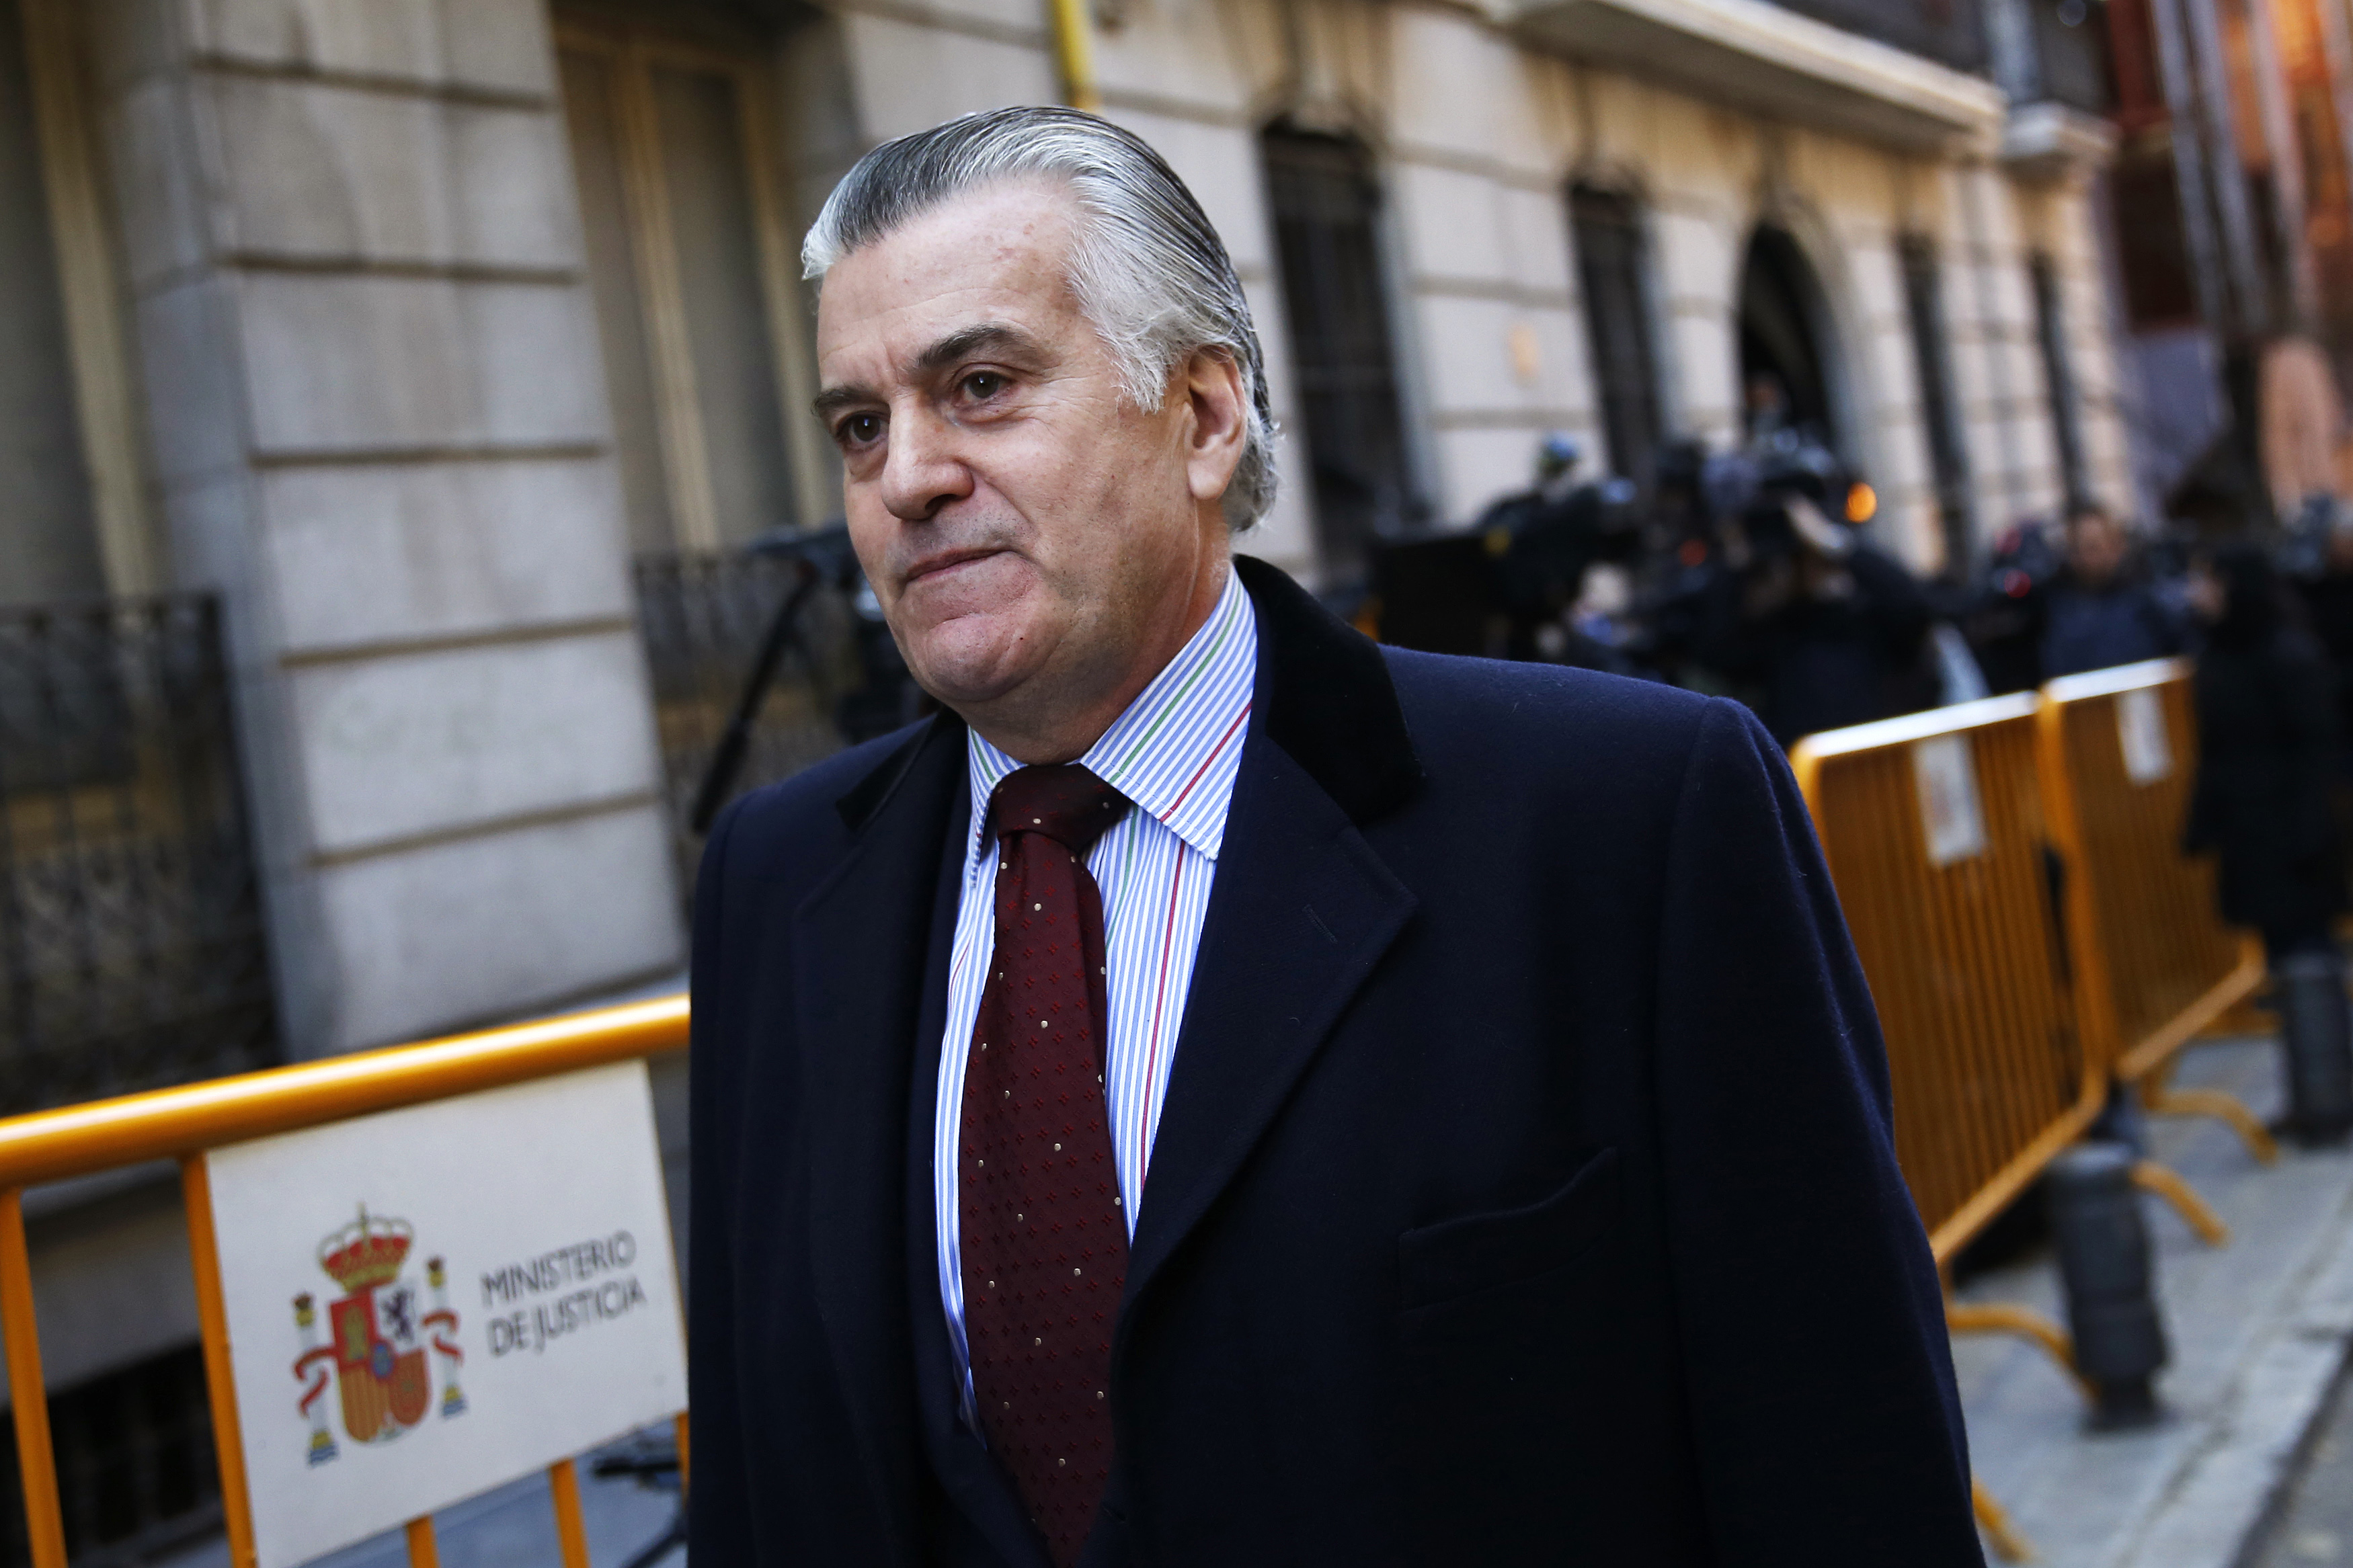 Luis Barcenas, former treasurer of Spain's ruling People's Party (PP), leaves Spain's High Court, where he is required to check in three times per week, in central Madrid January 23, 2015. Barcenas, who was in jail awaiting trial on charges of money-laundering and other crimes, has been granted provisional liberty with a bail of 200,000 euros ($231,820), a High Court spokeswoman said. Barcenas has been in jail since June 2013 over a long-running corruption investigation which is a source of great embarrassment to the PP, struggling in opinion polls in an election year. REUTERS/Susana Vera (SPAIN - Tags: CRIME LAW POLITICS) - RTR4MMPH